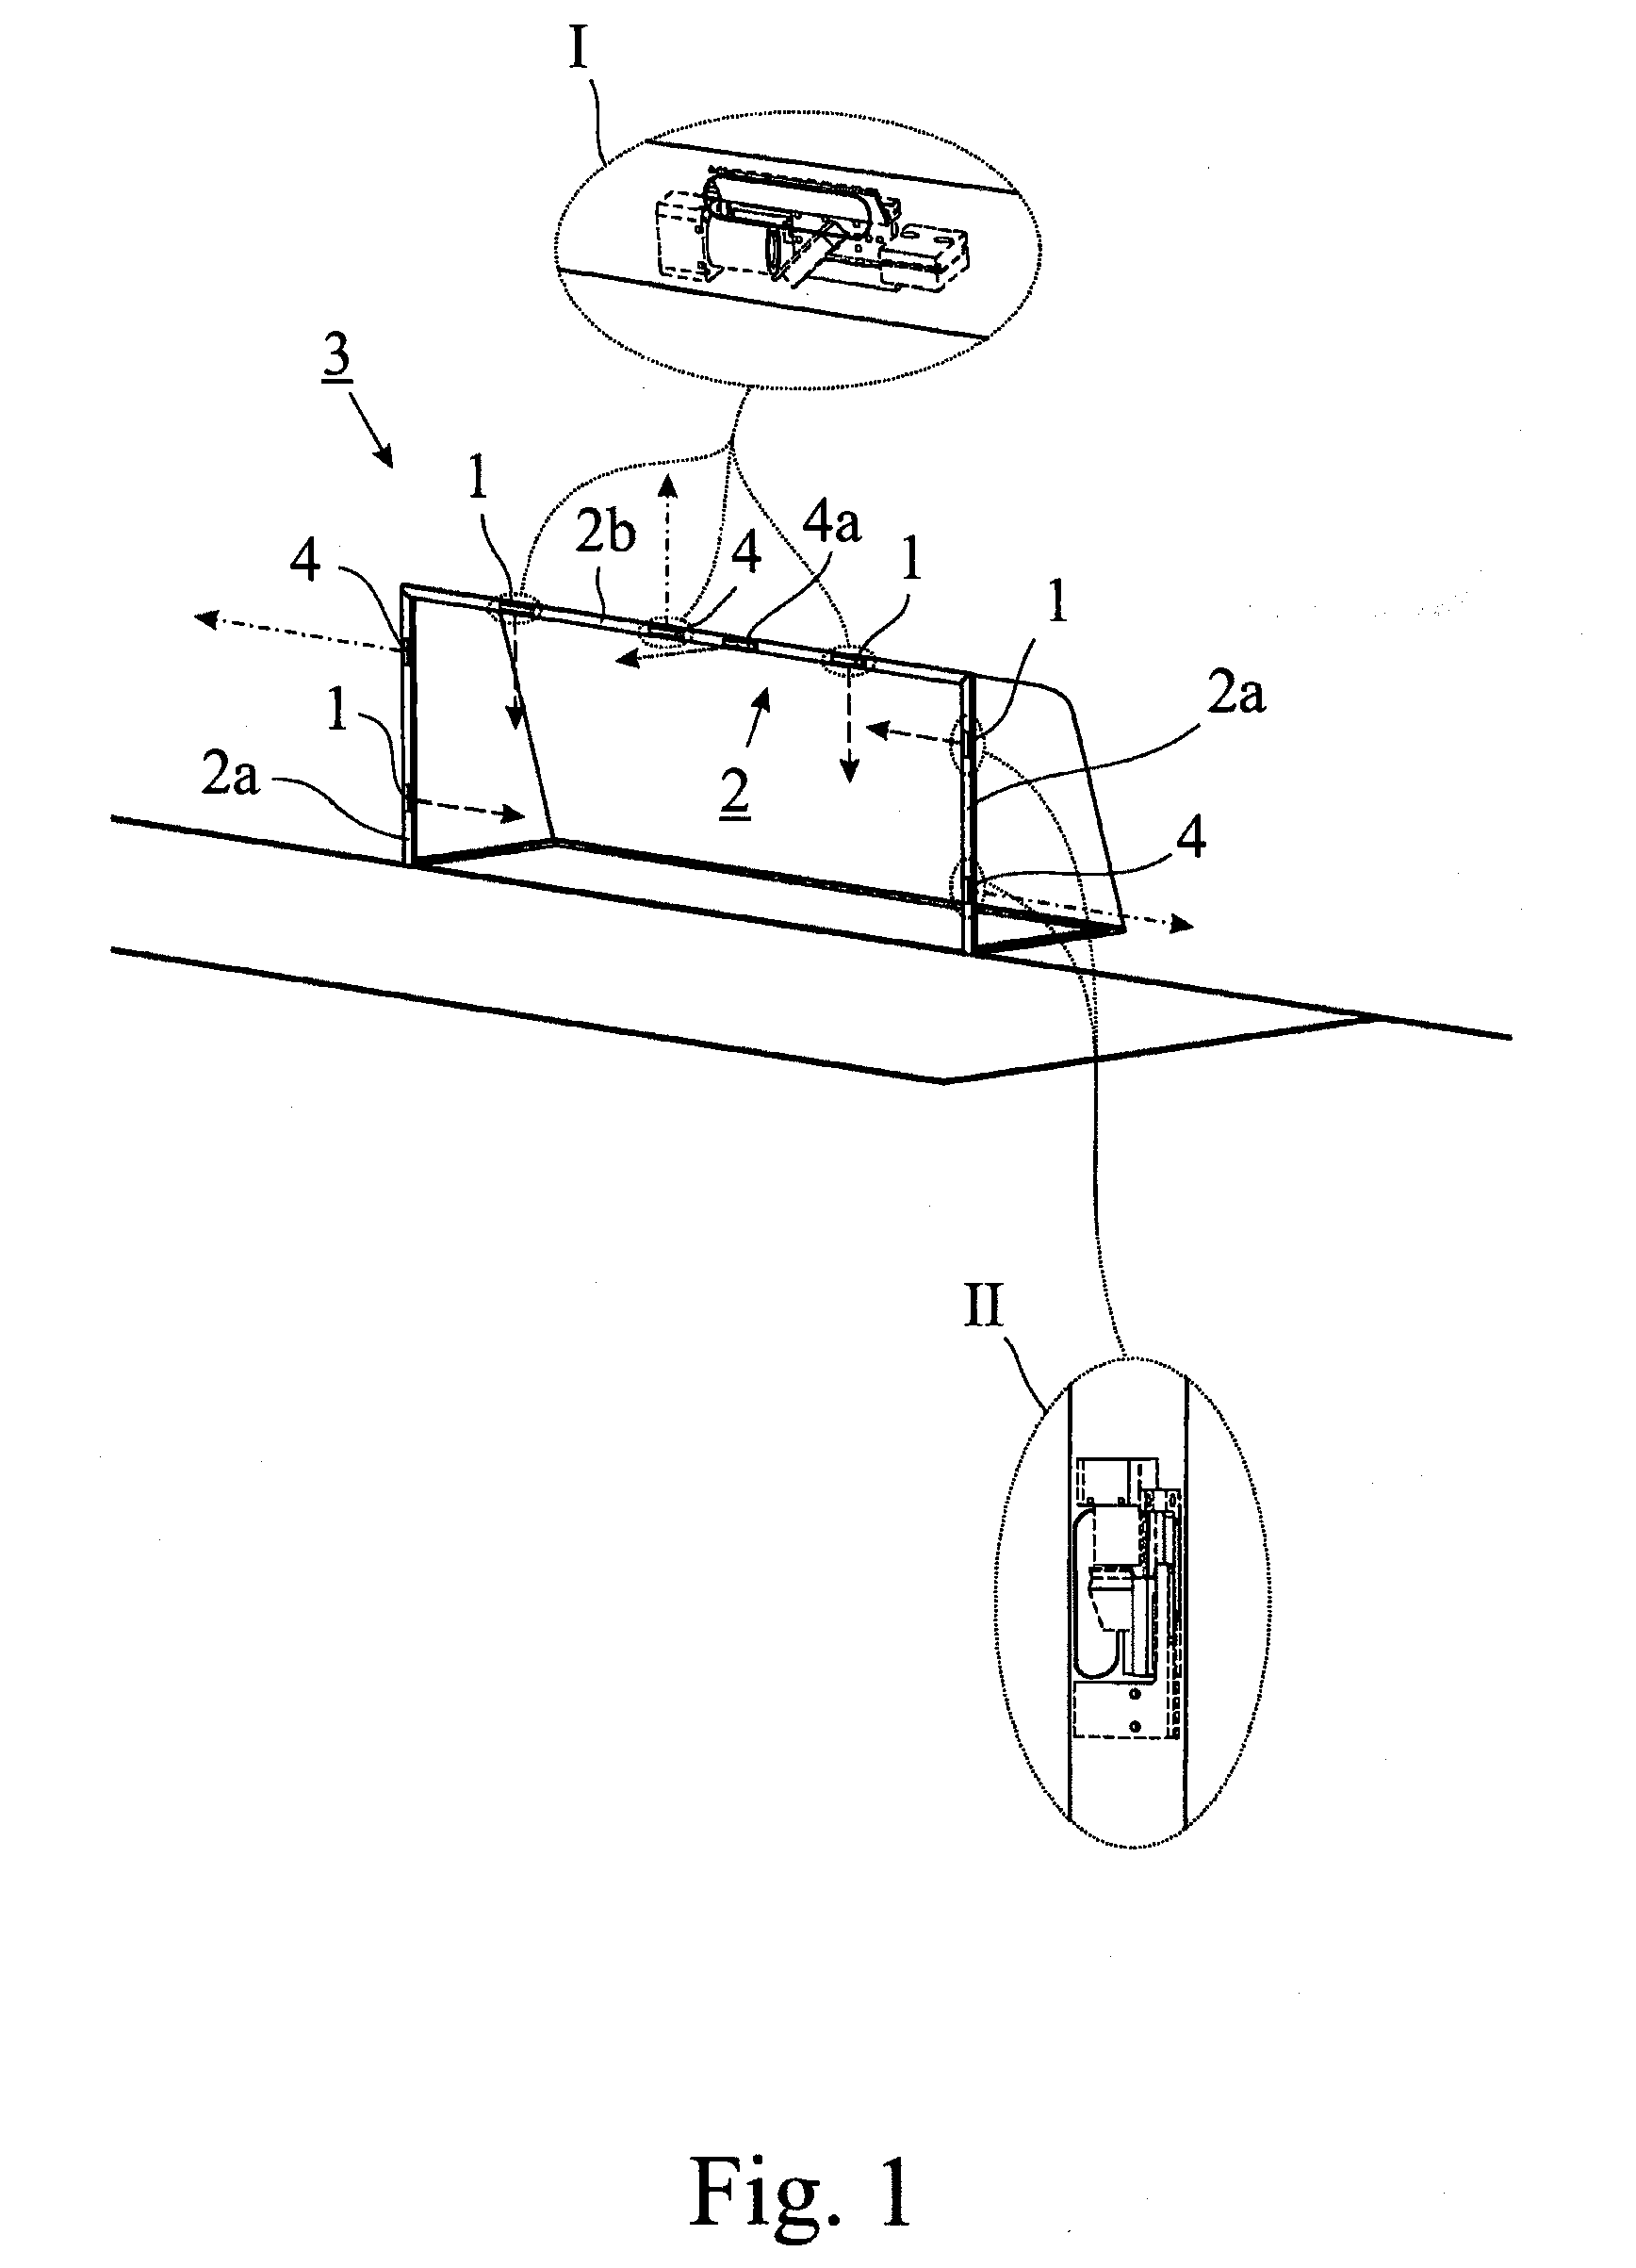 Goal recognition system and method for recognizing a goal